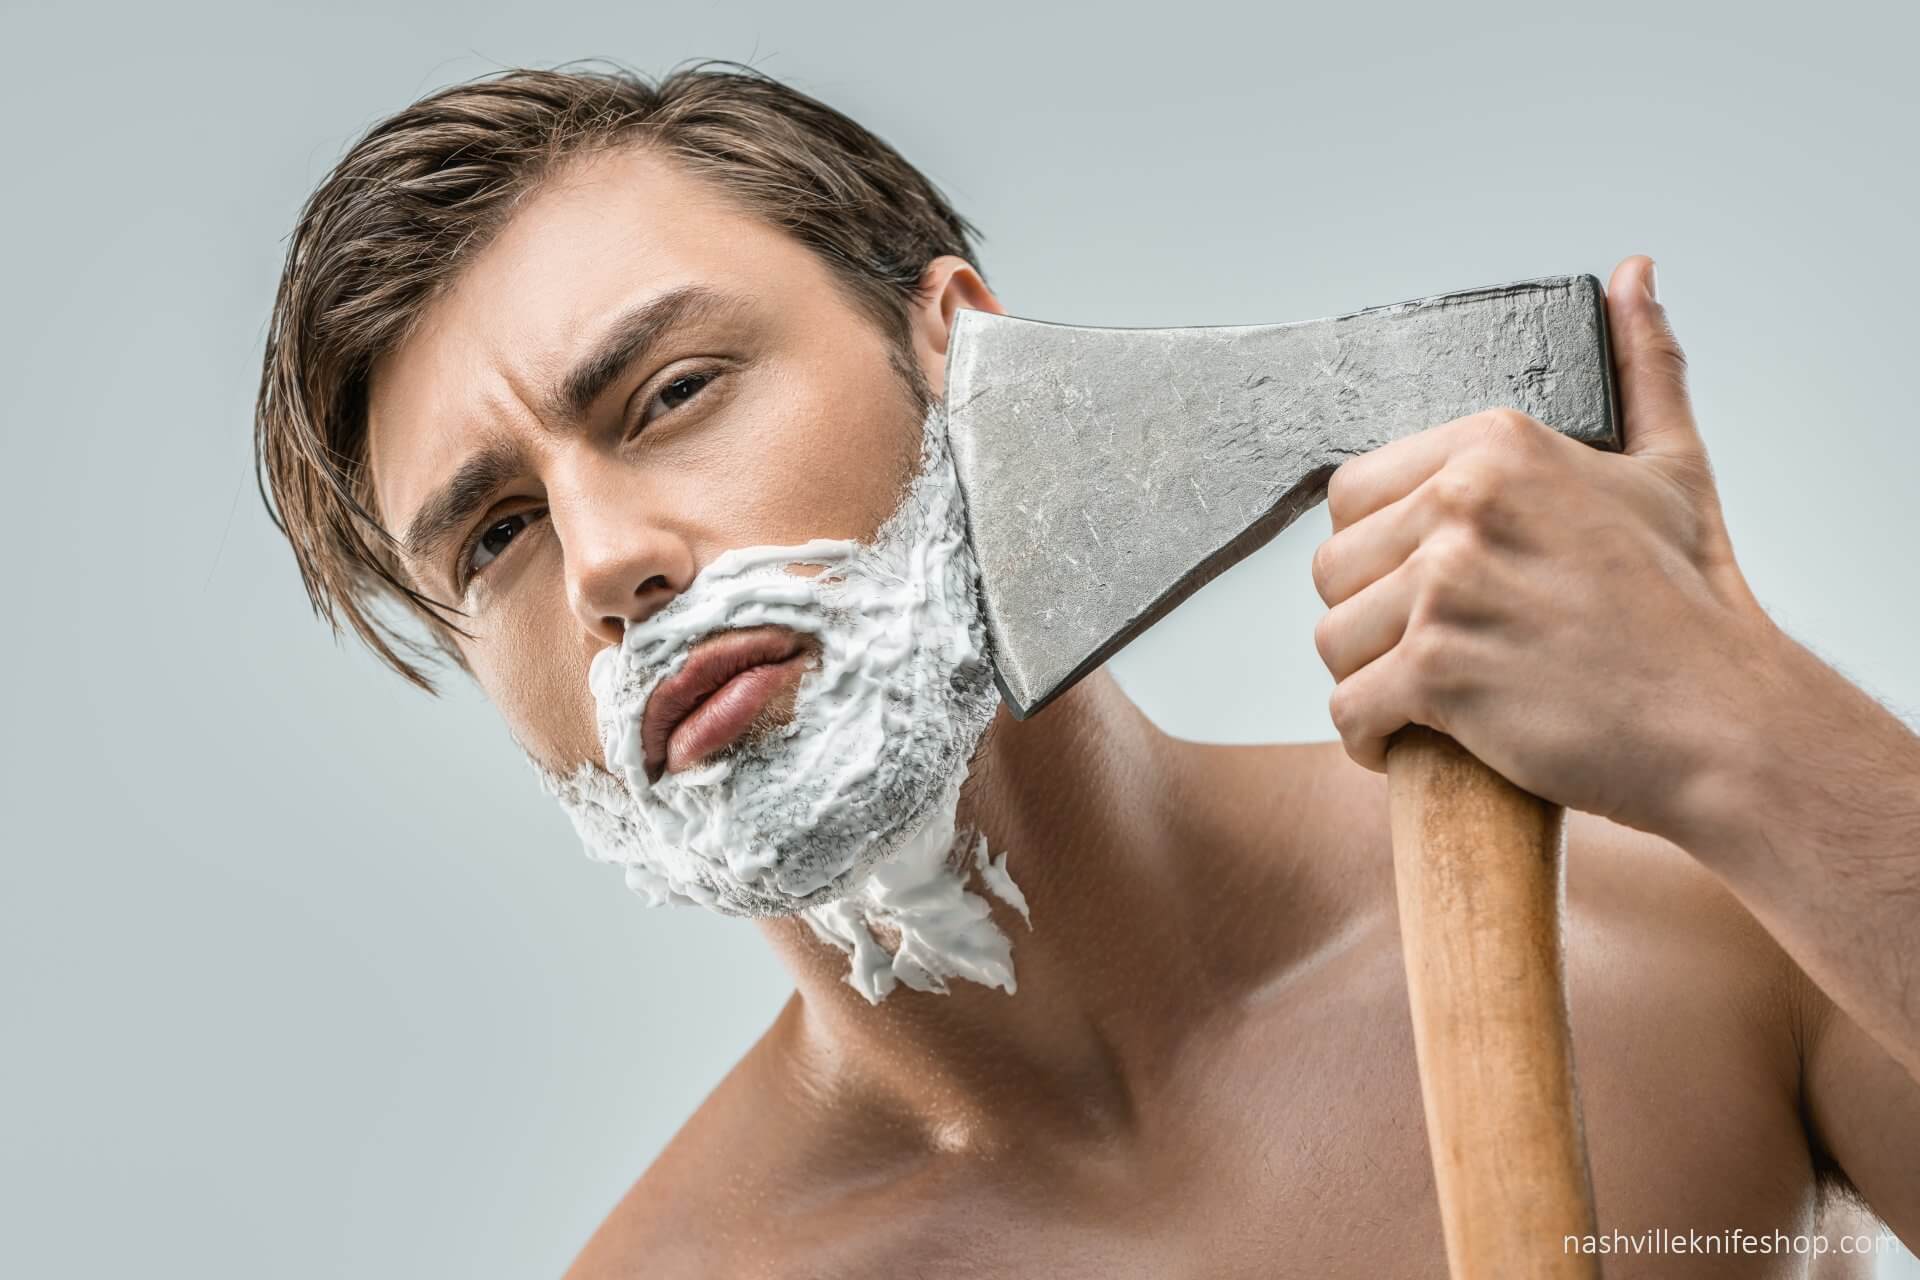 How to shave properly!